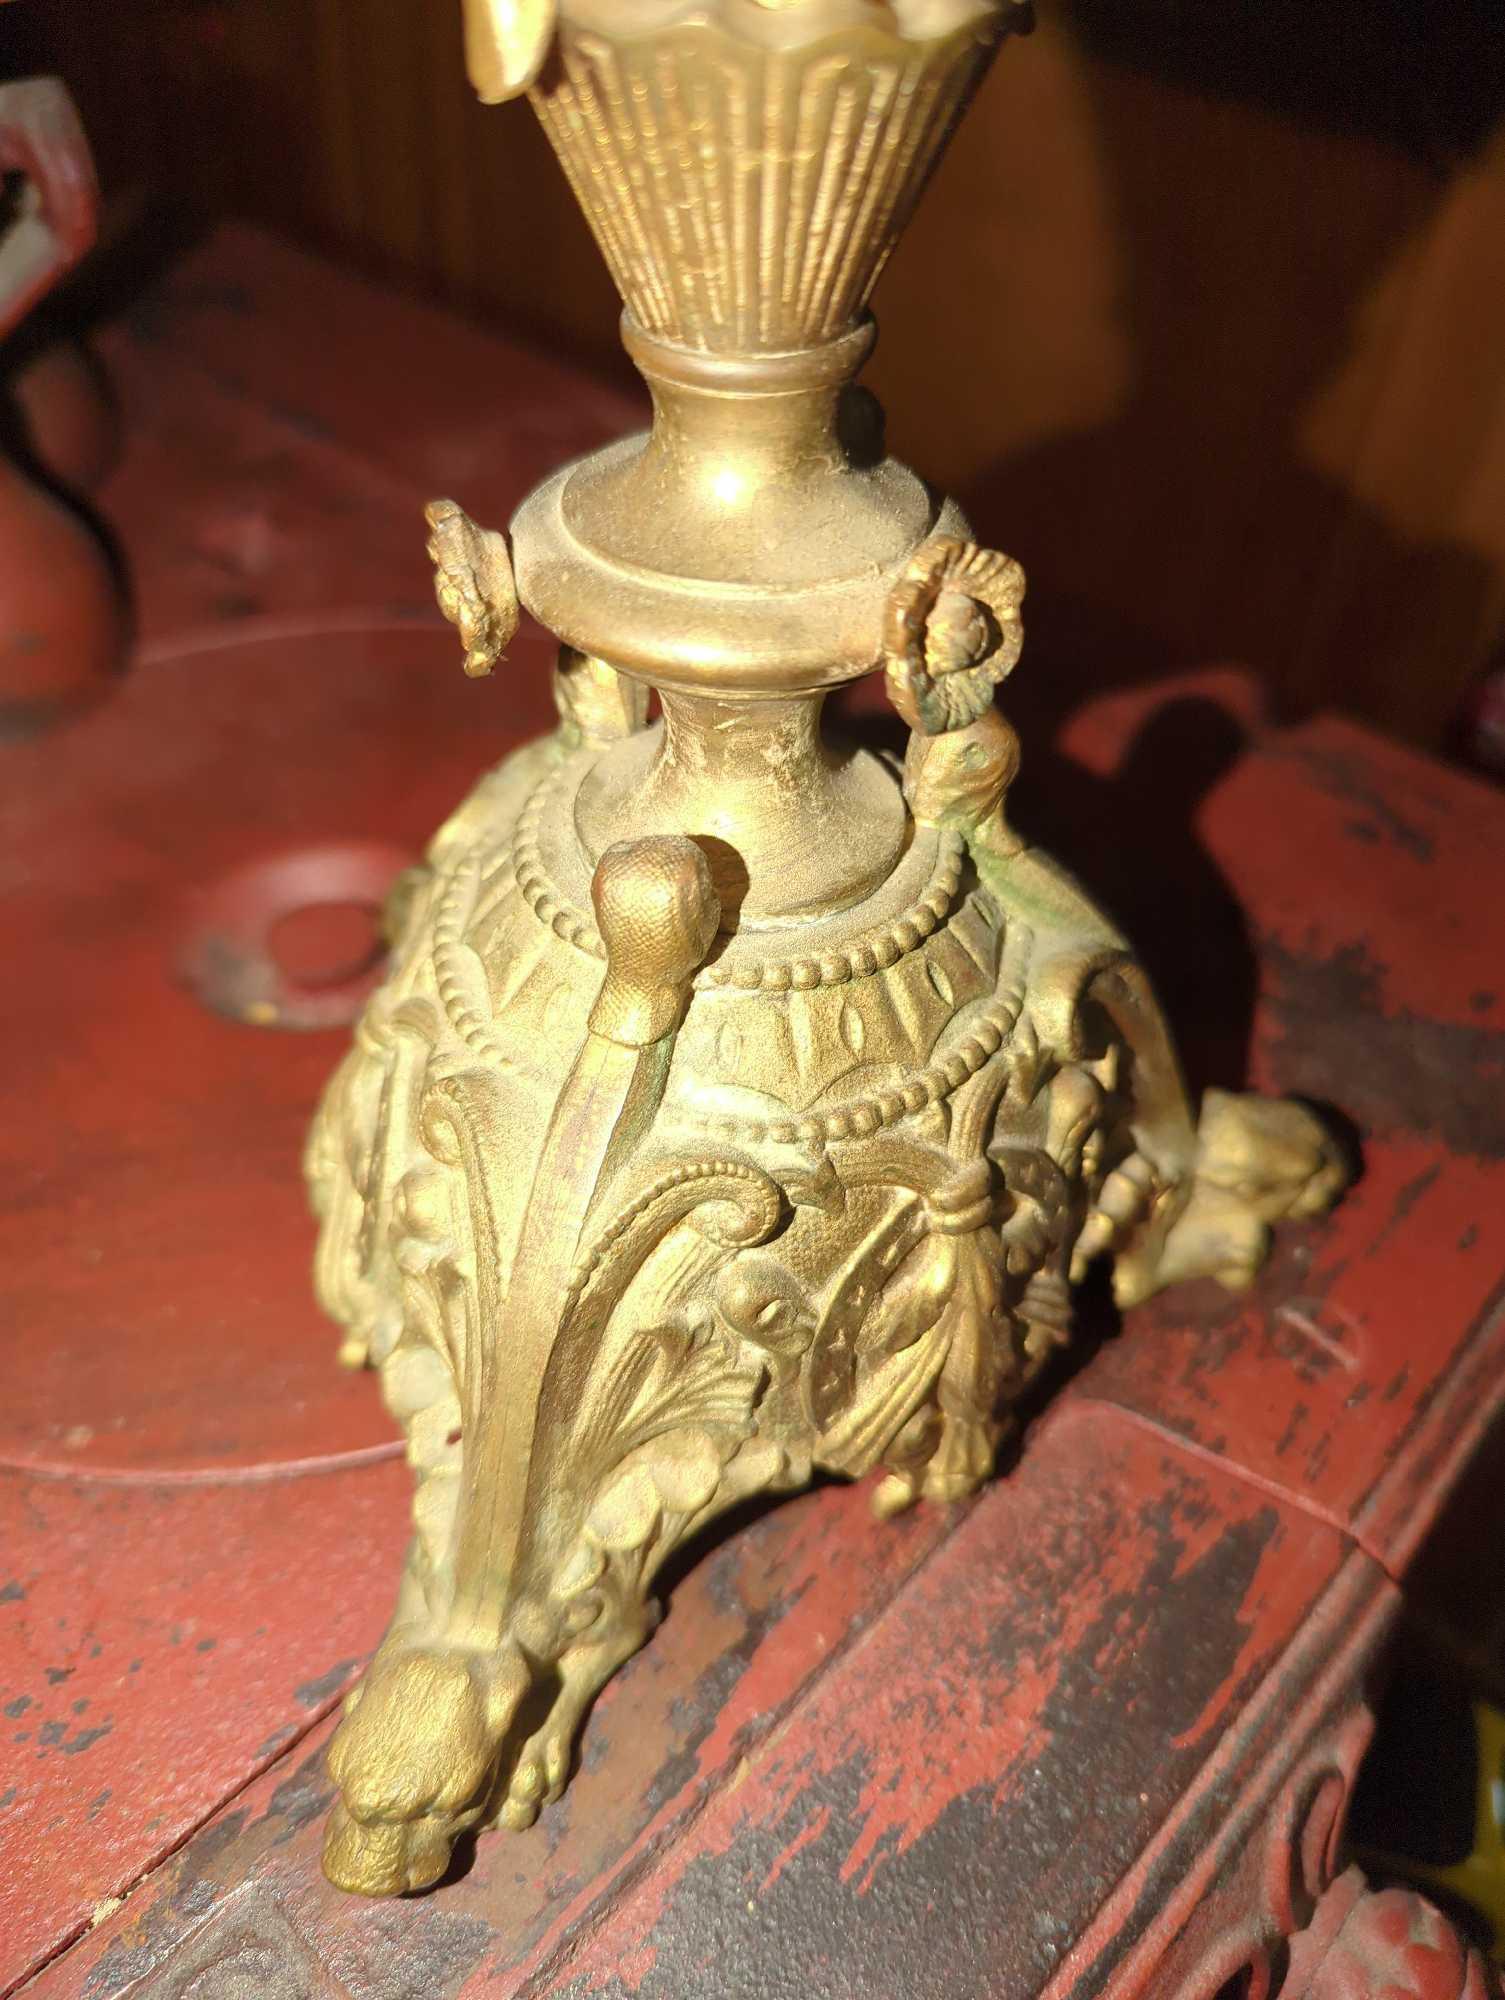 (KIT) PAIR OF ANTIQUE BRASS AND OPALINE FLOWER CANDLESTICK HOLDERS, IS MISSING SOME FLOWERS, MEASURE